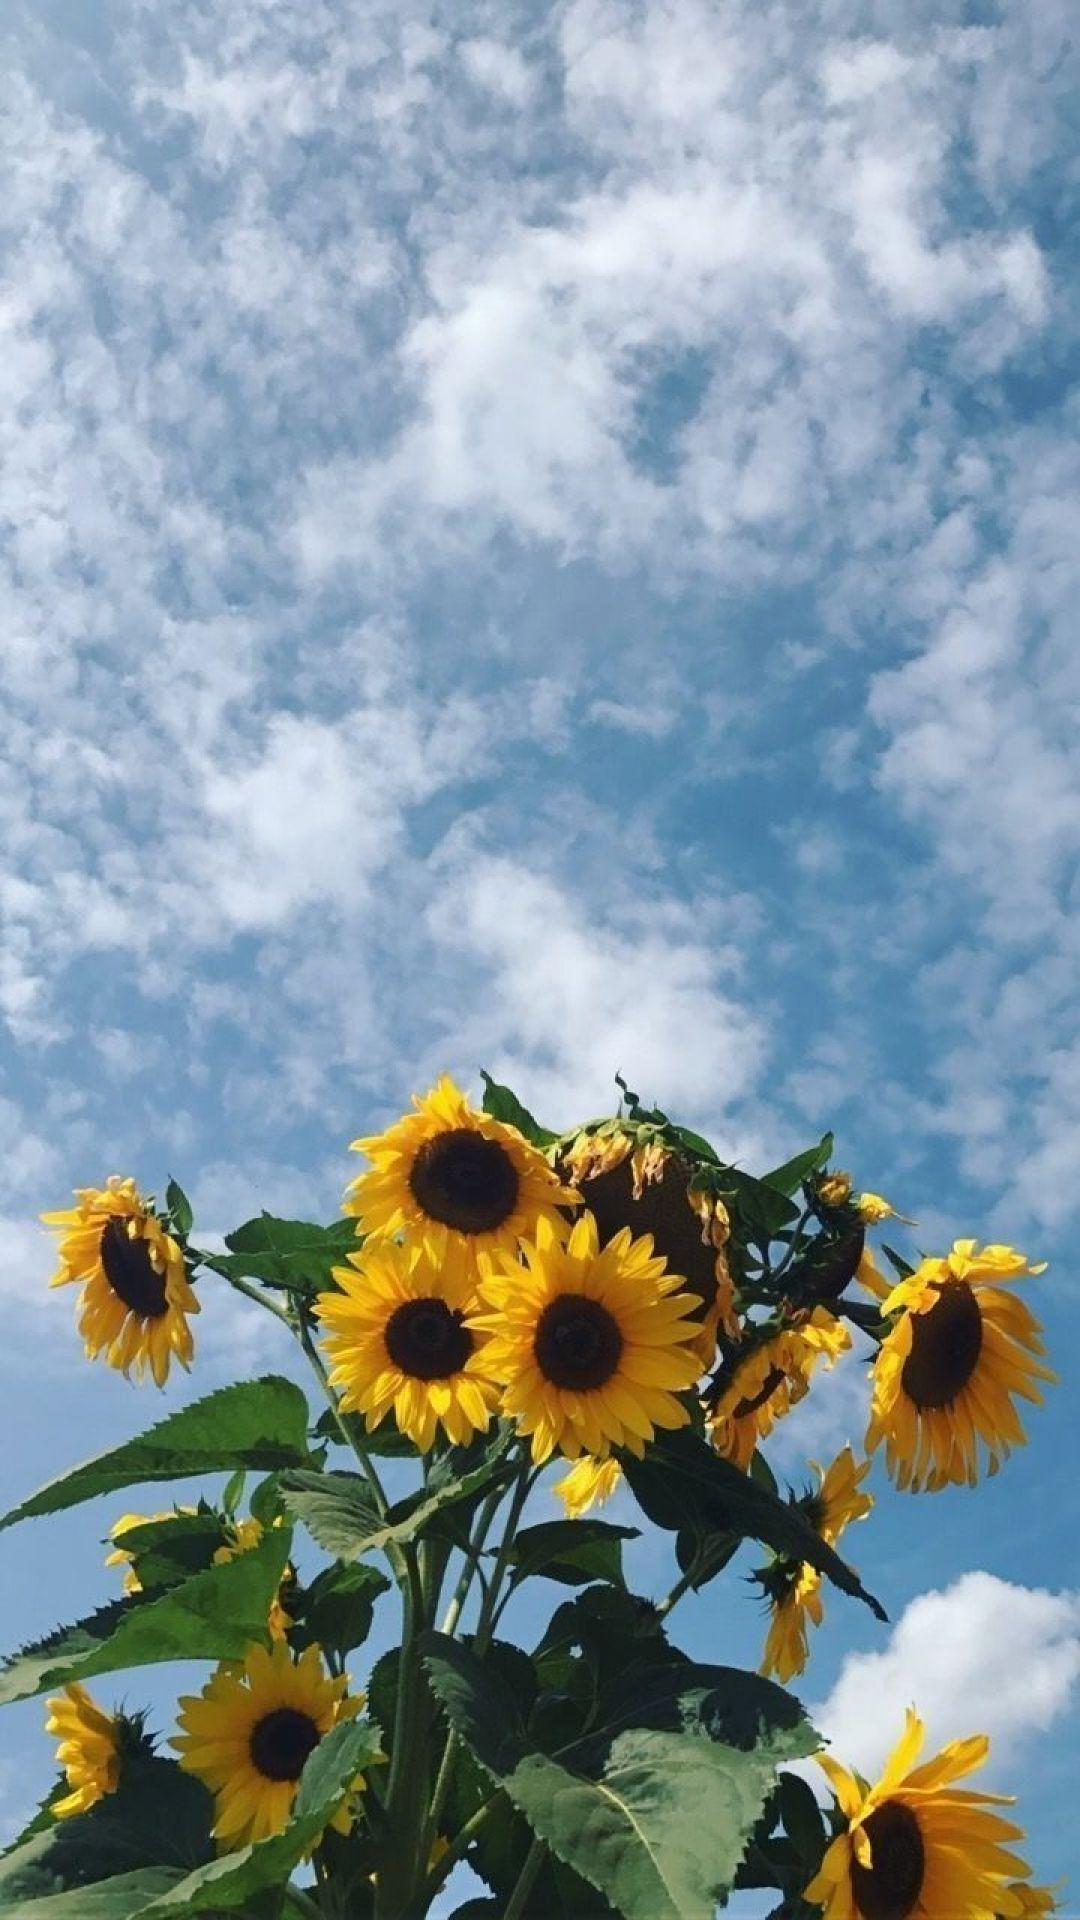 Yellow Aesthetic Sunflowers HD Wallpaper (Desktop Background / Android / iPhone) (1080p, 4k) (1080x1920) (2021)